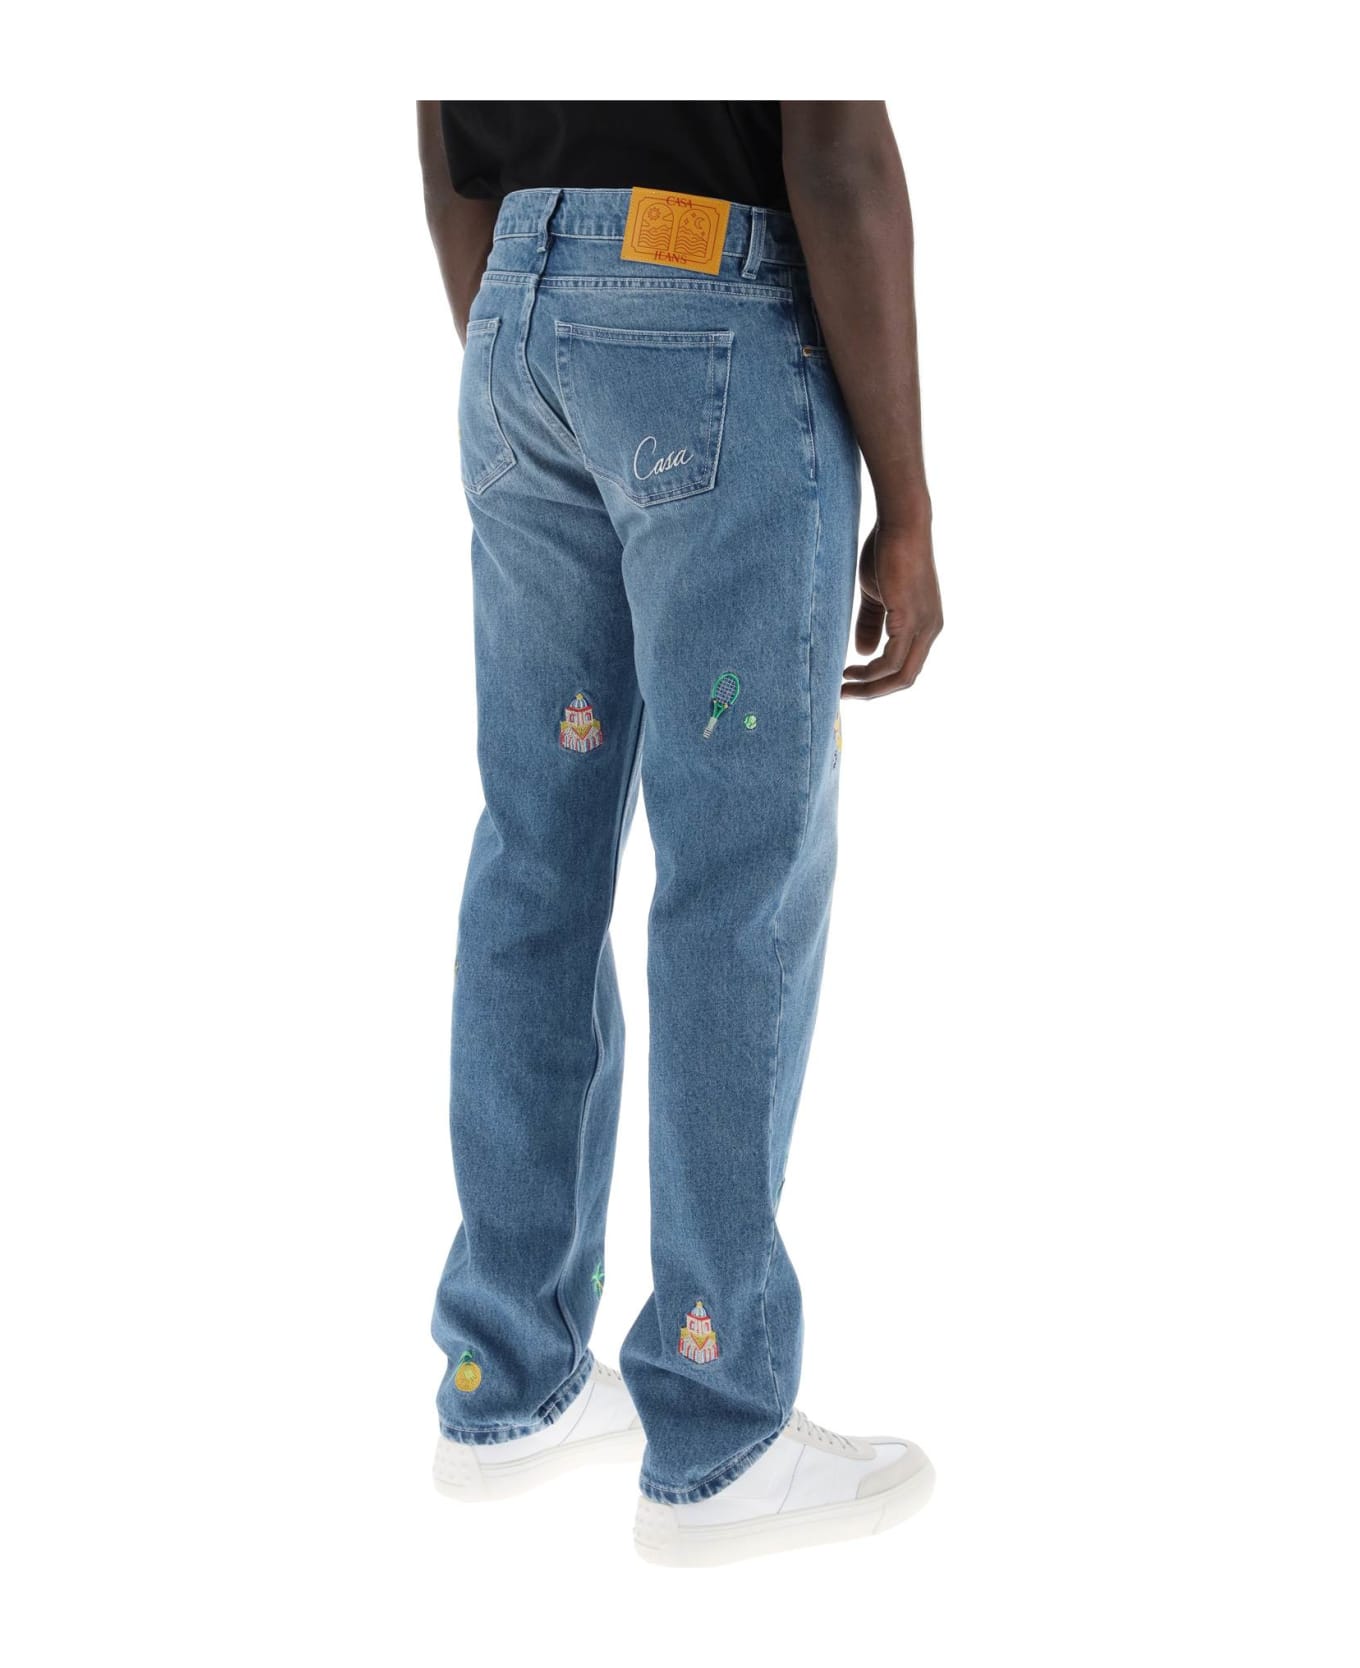 Casablanca Embroidered Straight Jeans - STONE WASH (Light blue)